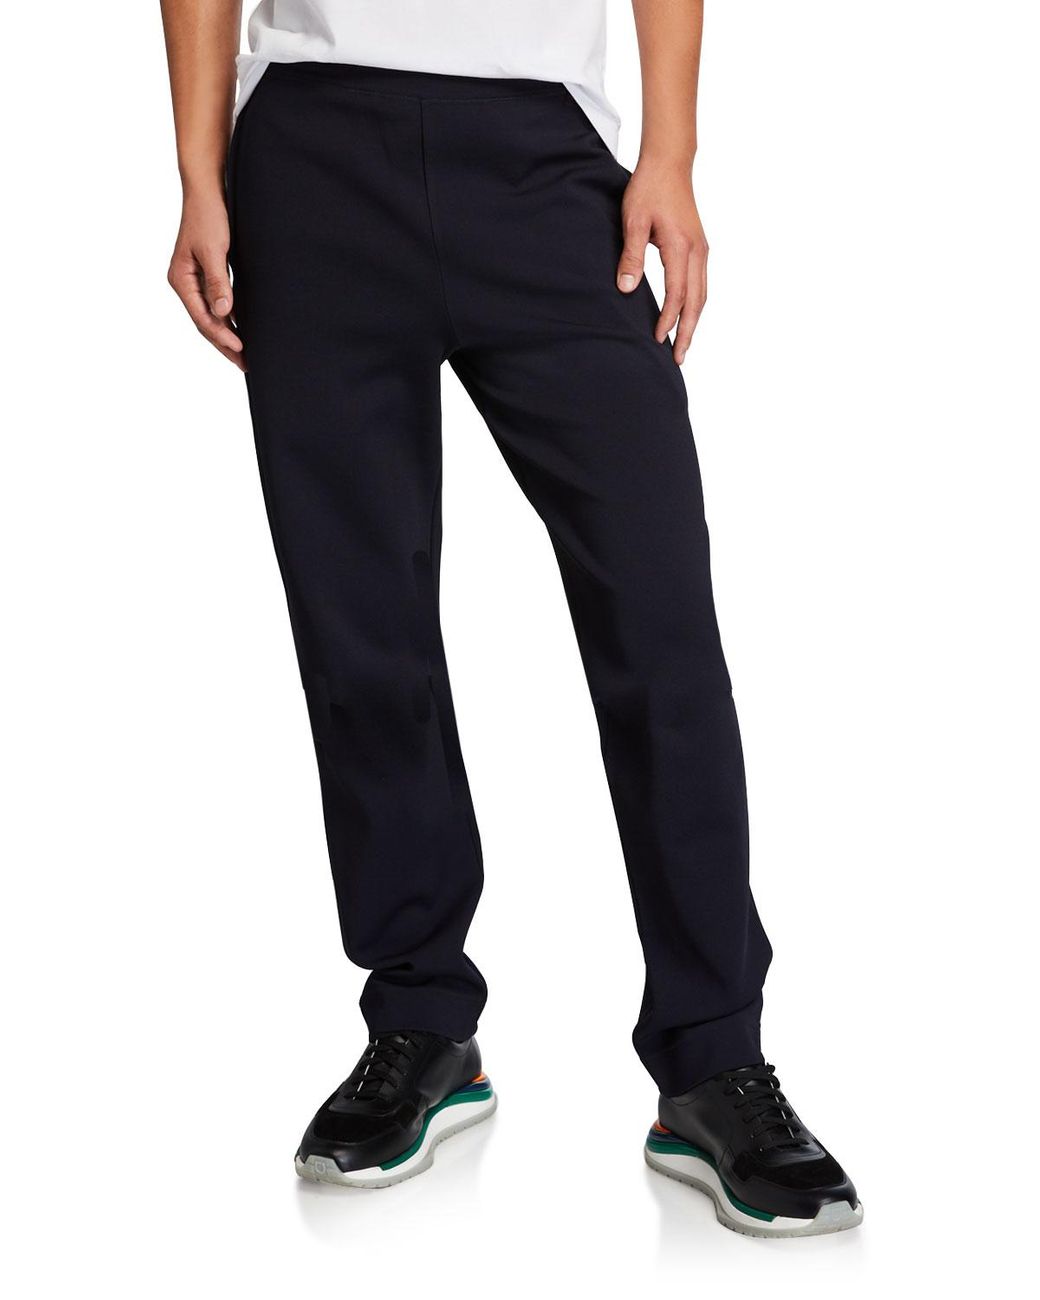 Valentino Synthetic Pants in Blue for Men - Lyst